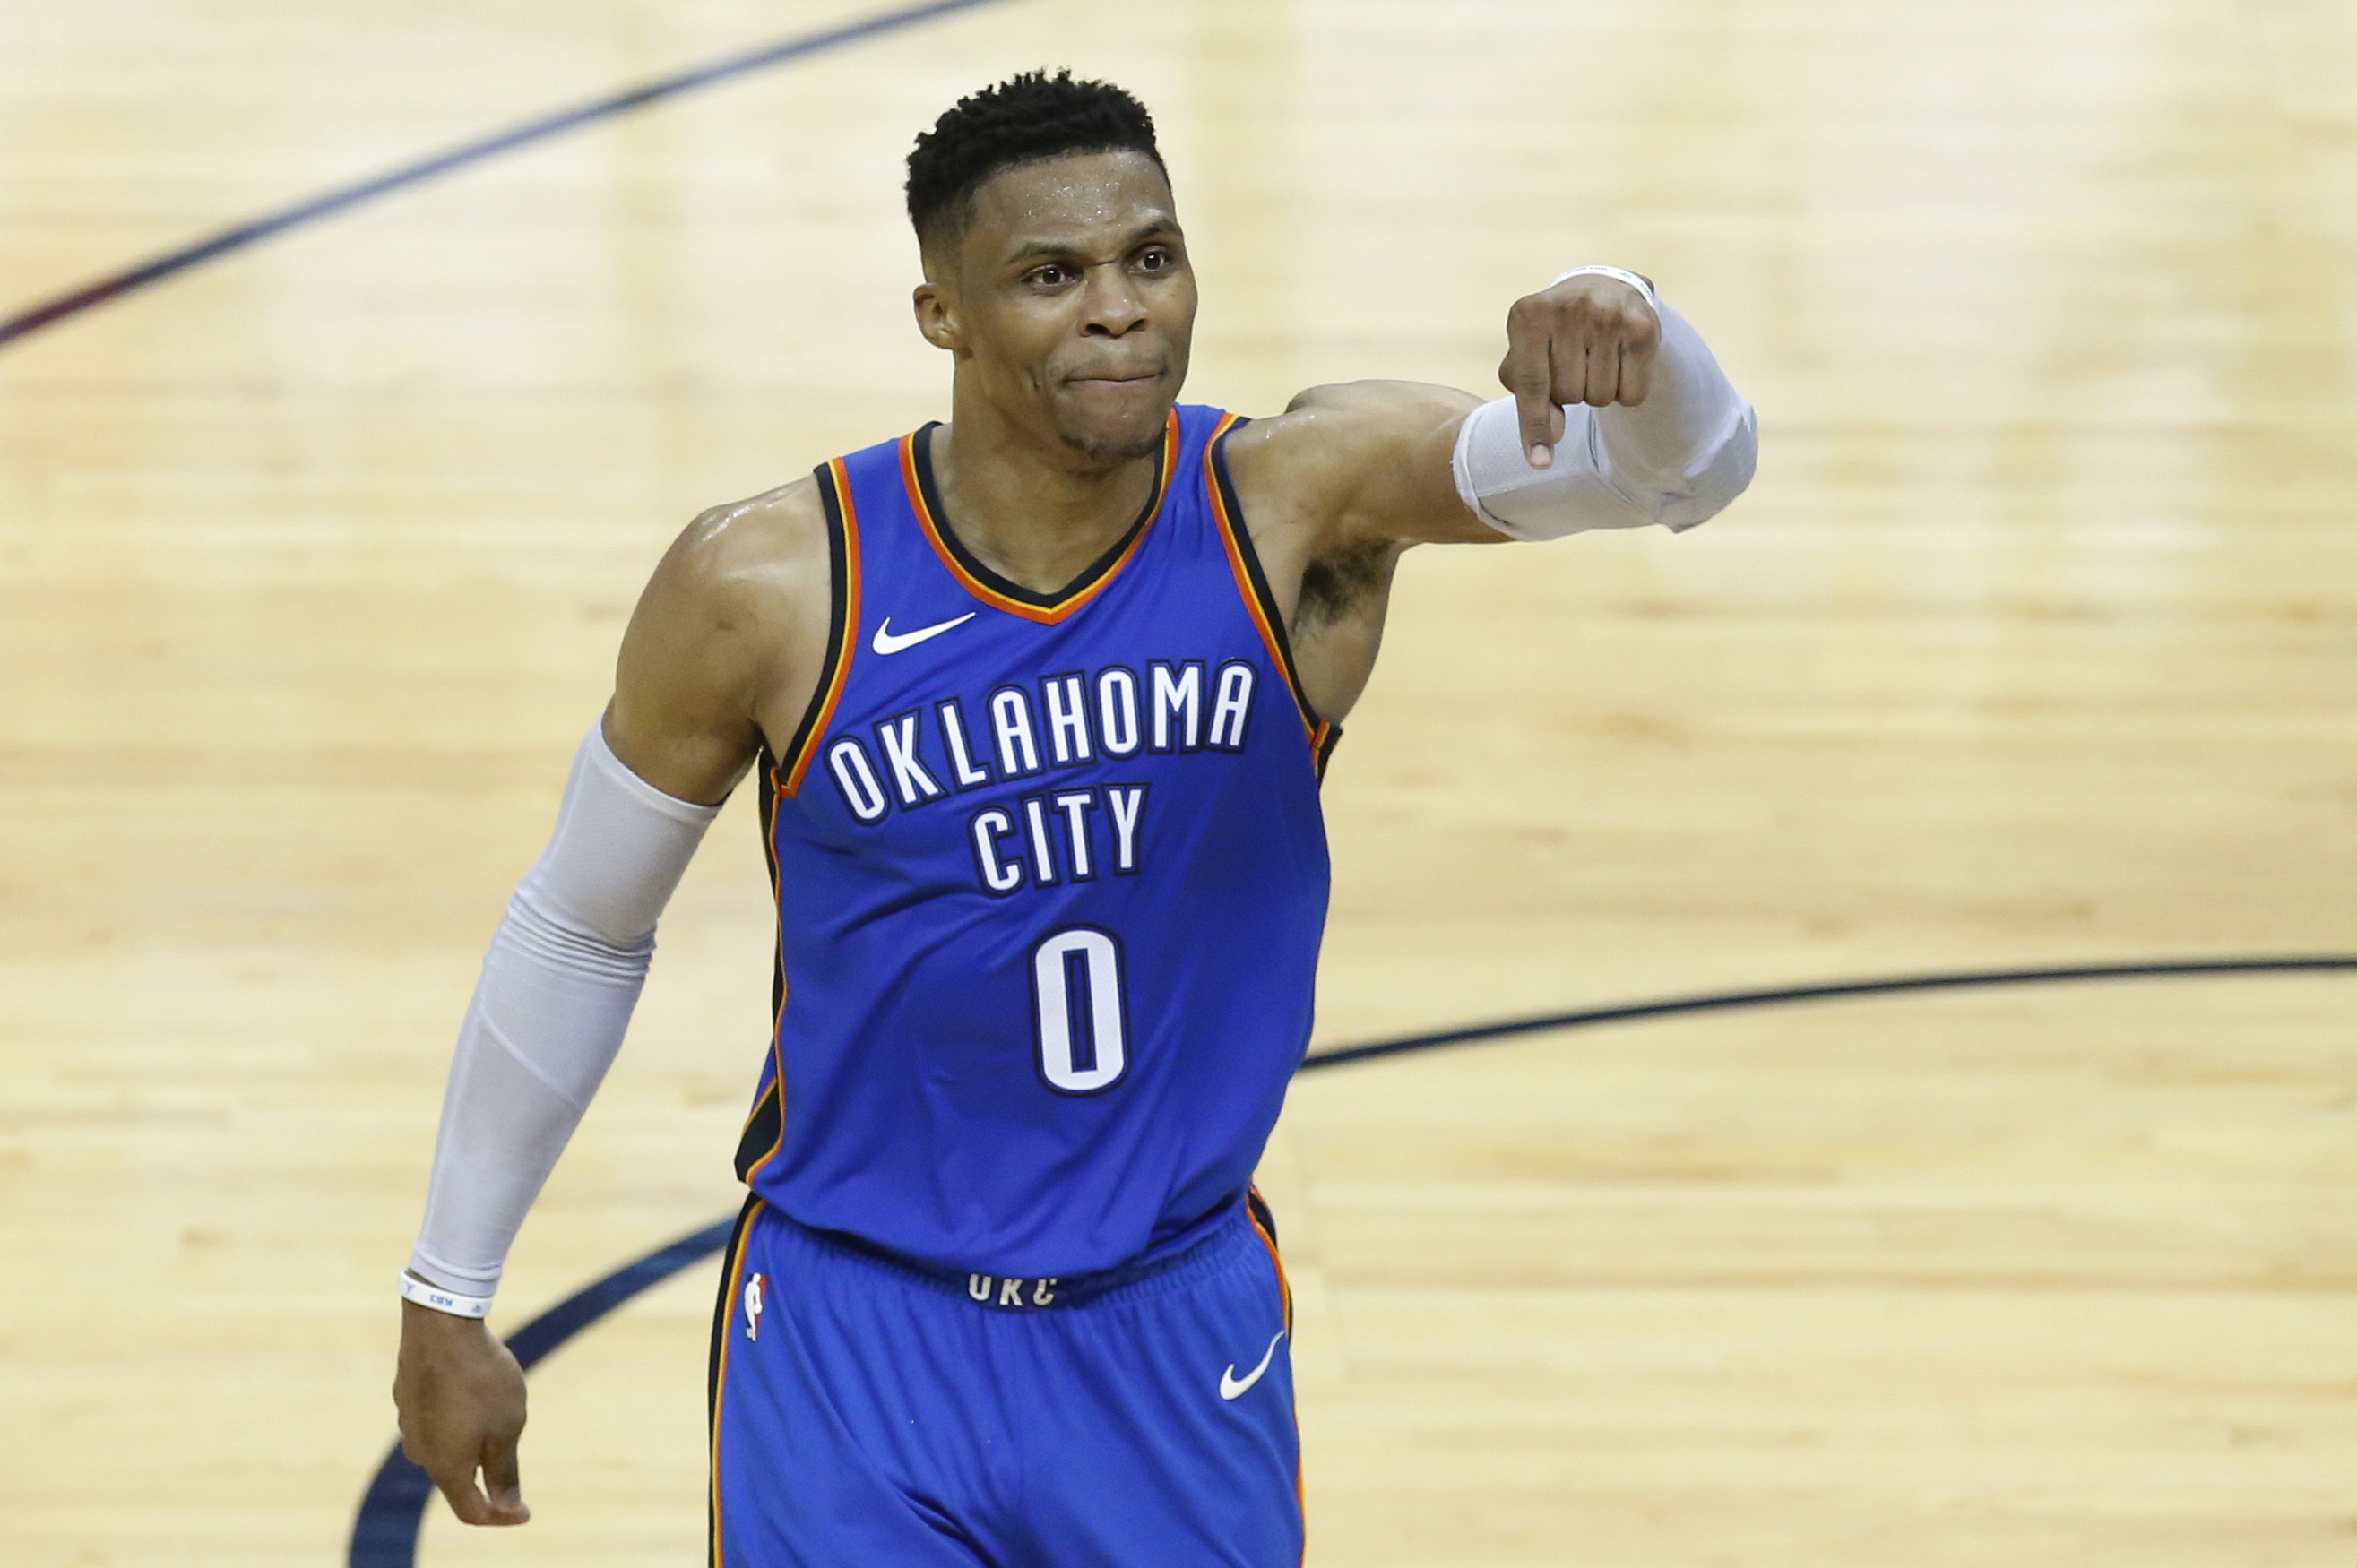 Russell Westbrook doesn't care what anybody says, while James Harden has  created a lane for himself: The two superstars and former OKC teammates  discuss fashion - The SportsRush